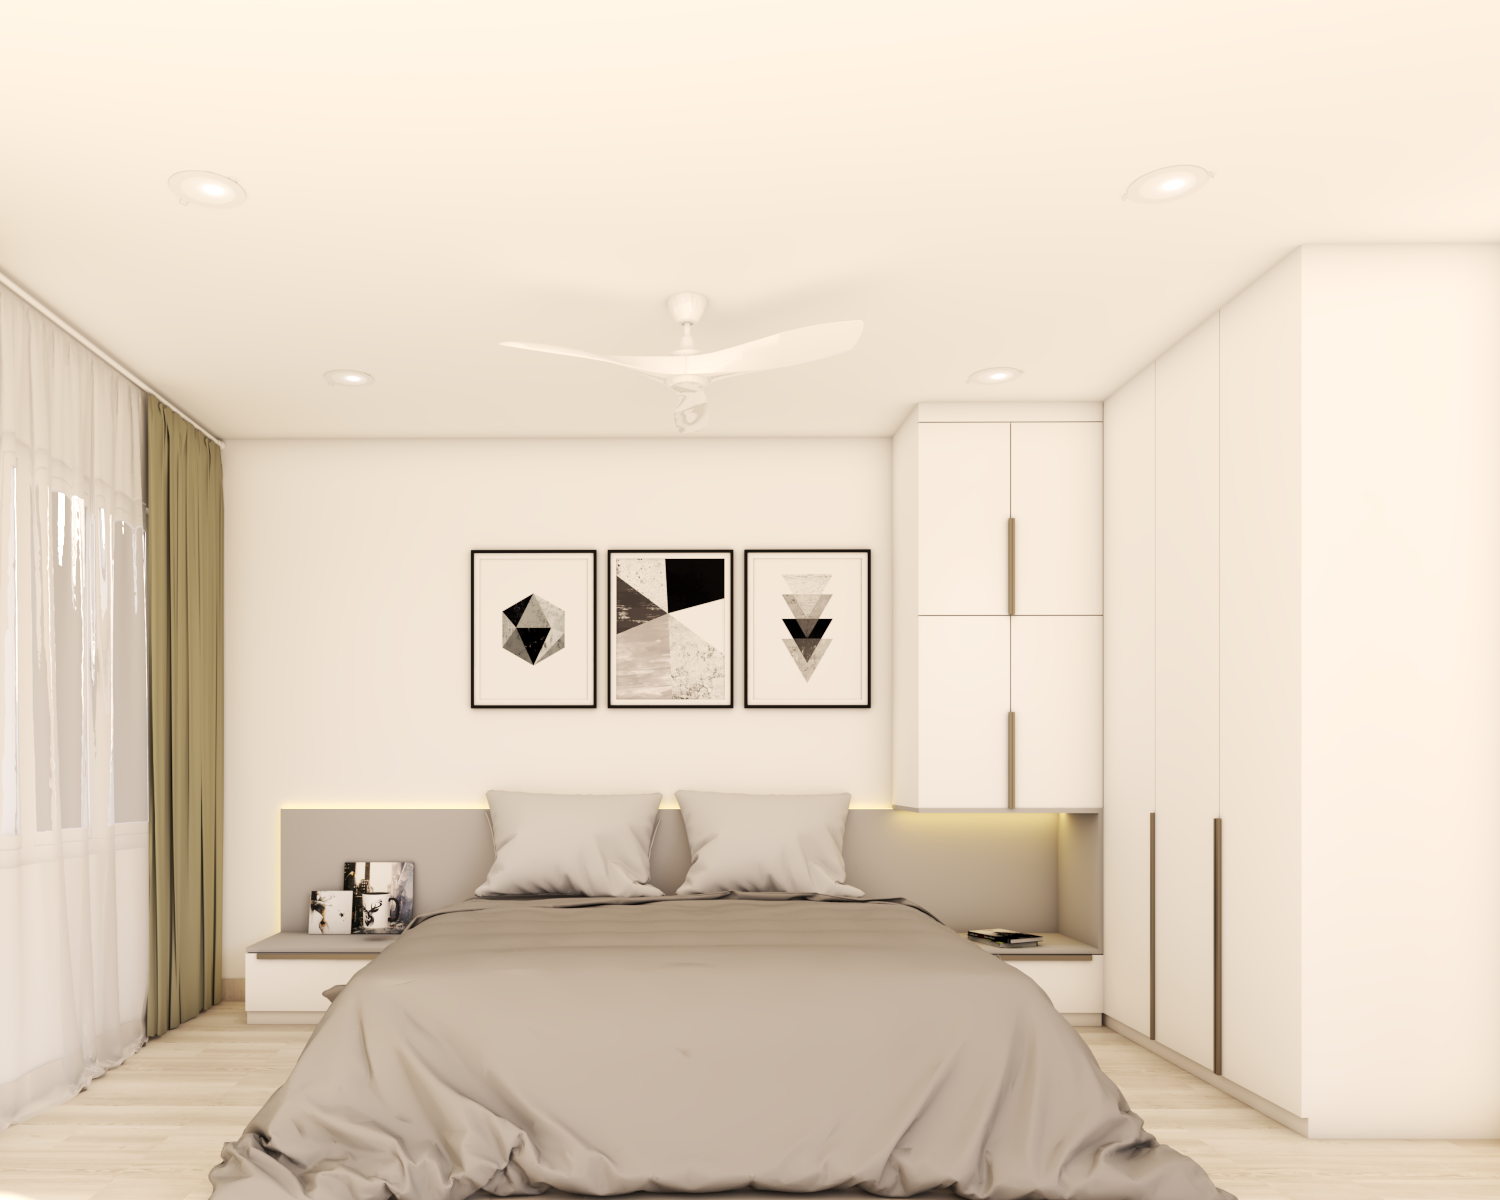 Minimalist Bedroom Design With Grey King-Sized Bed And White Storage